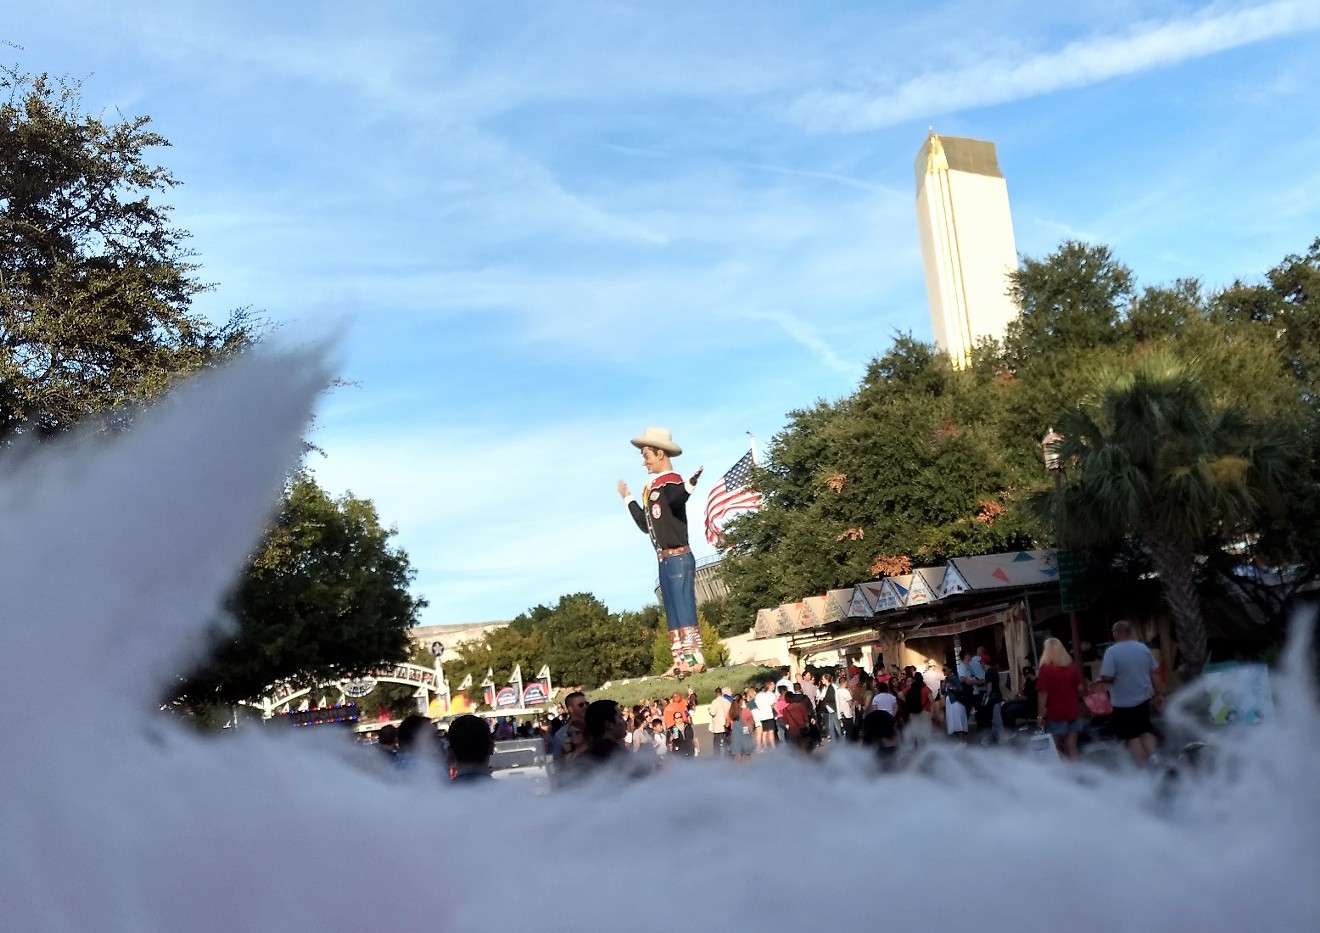 Big Tex, as seen over a half-eaten cone of cotton candy at the State Fair of Texas.